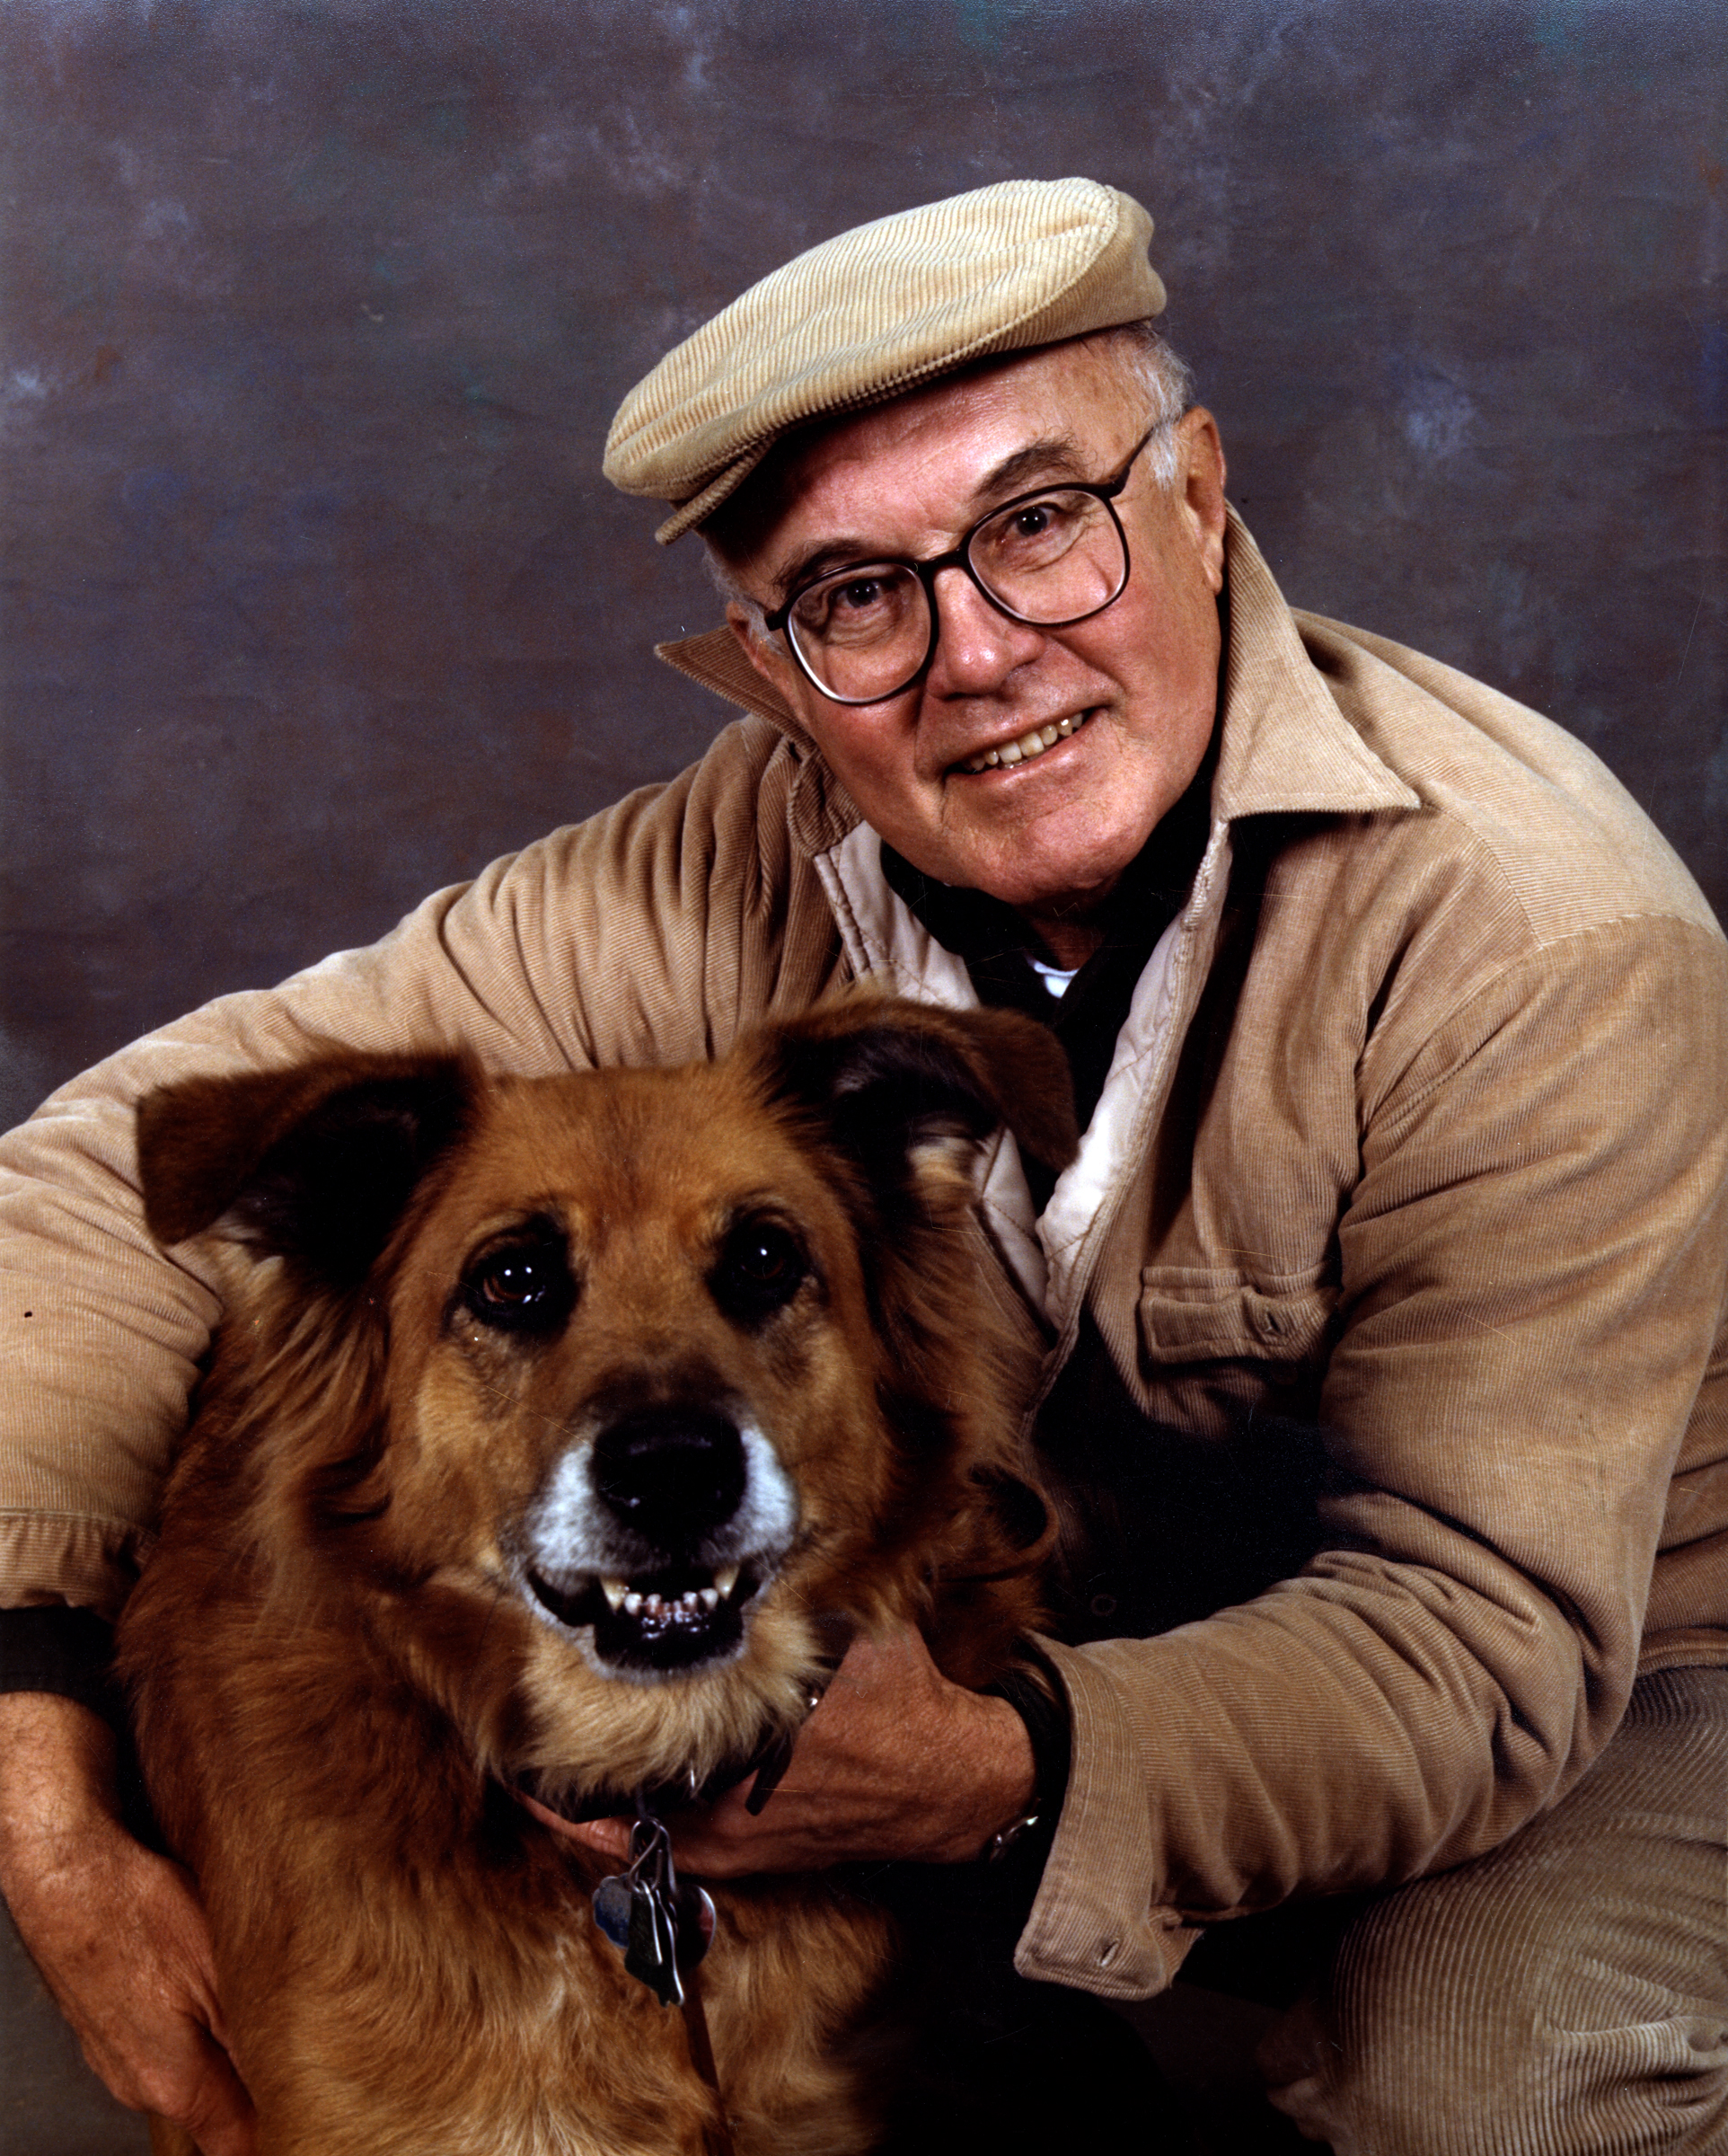 Richard K. Ernst with his dog smiling at the camera